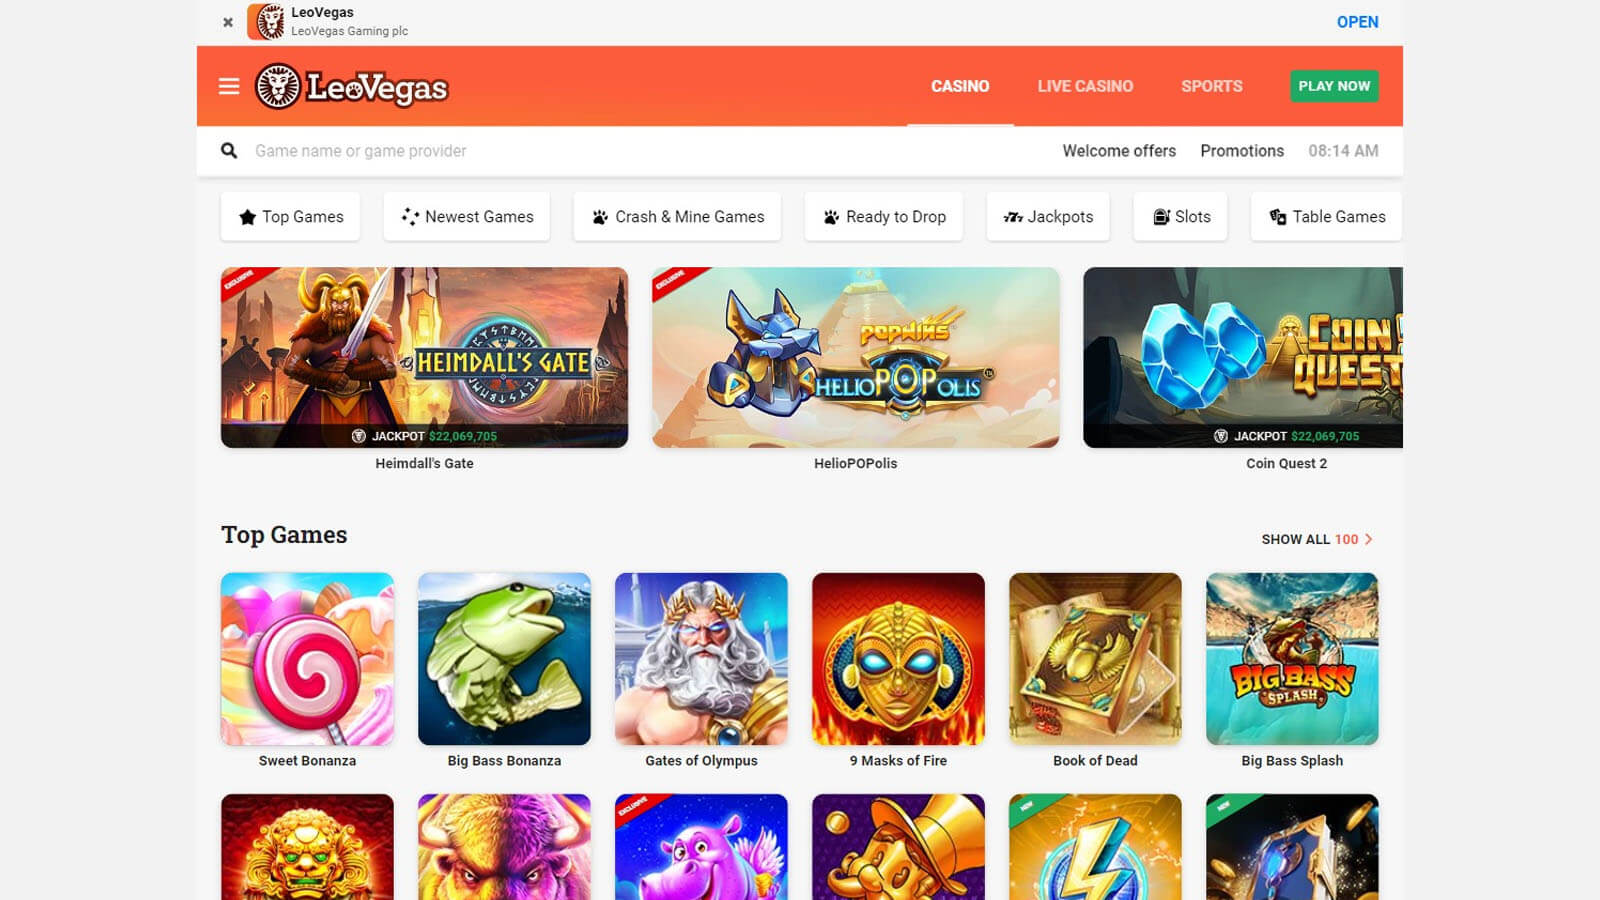 LeoVegas #2. Best Canadian online casino for high slot payouts